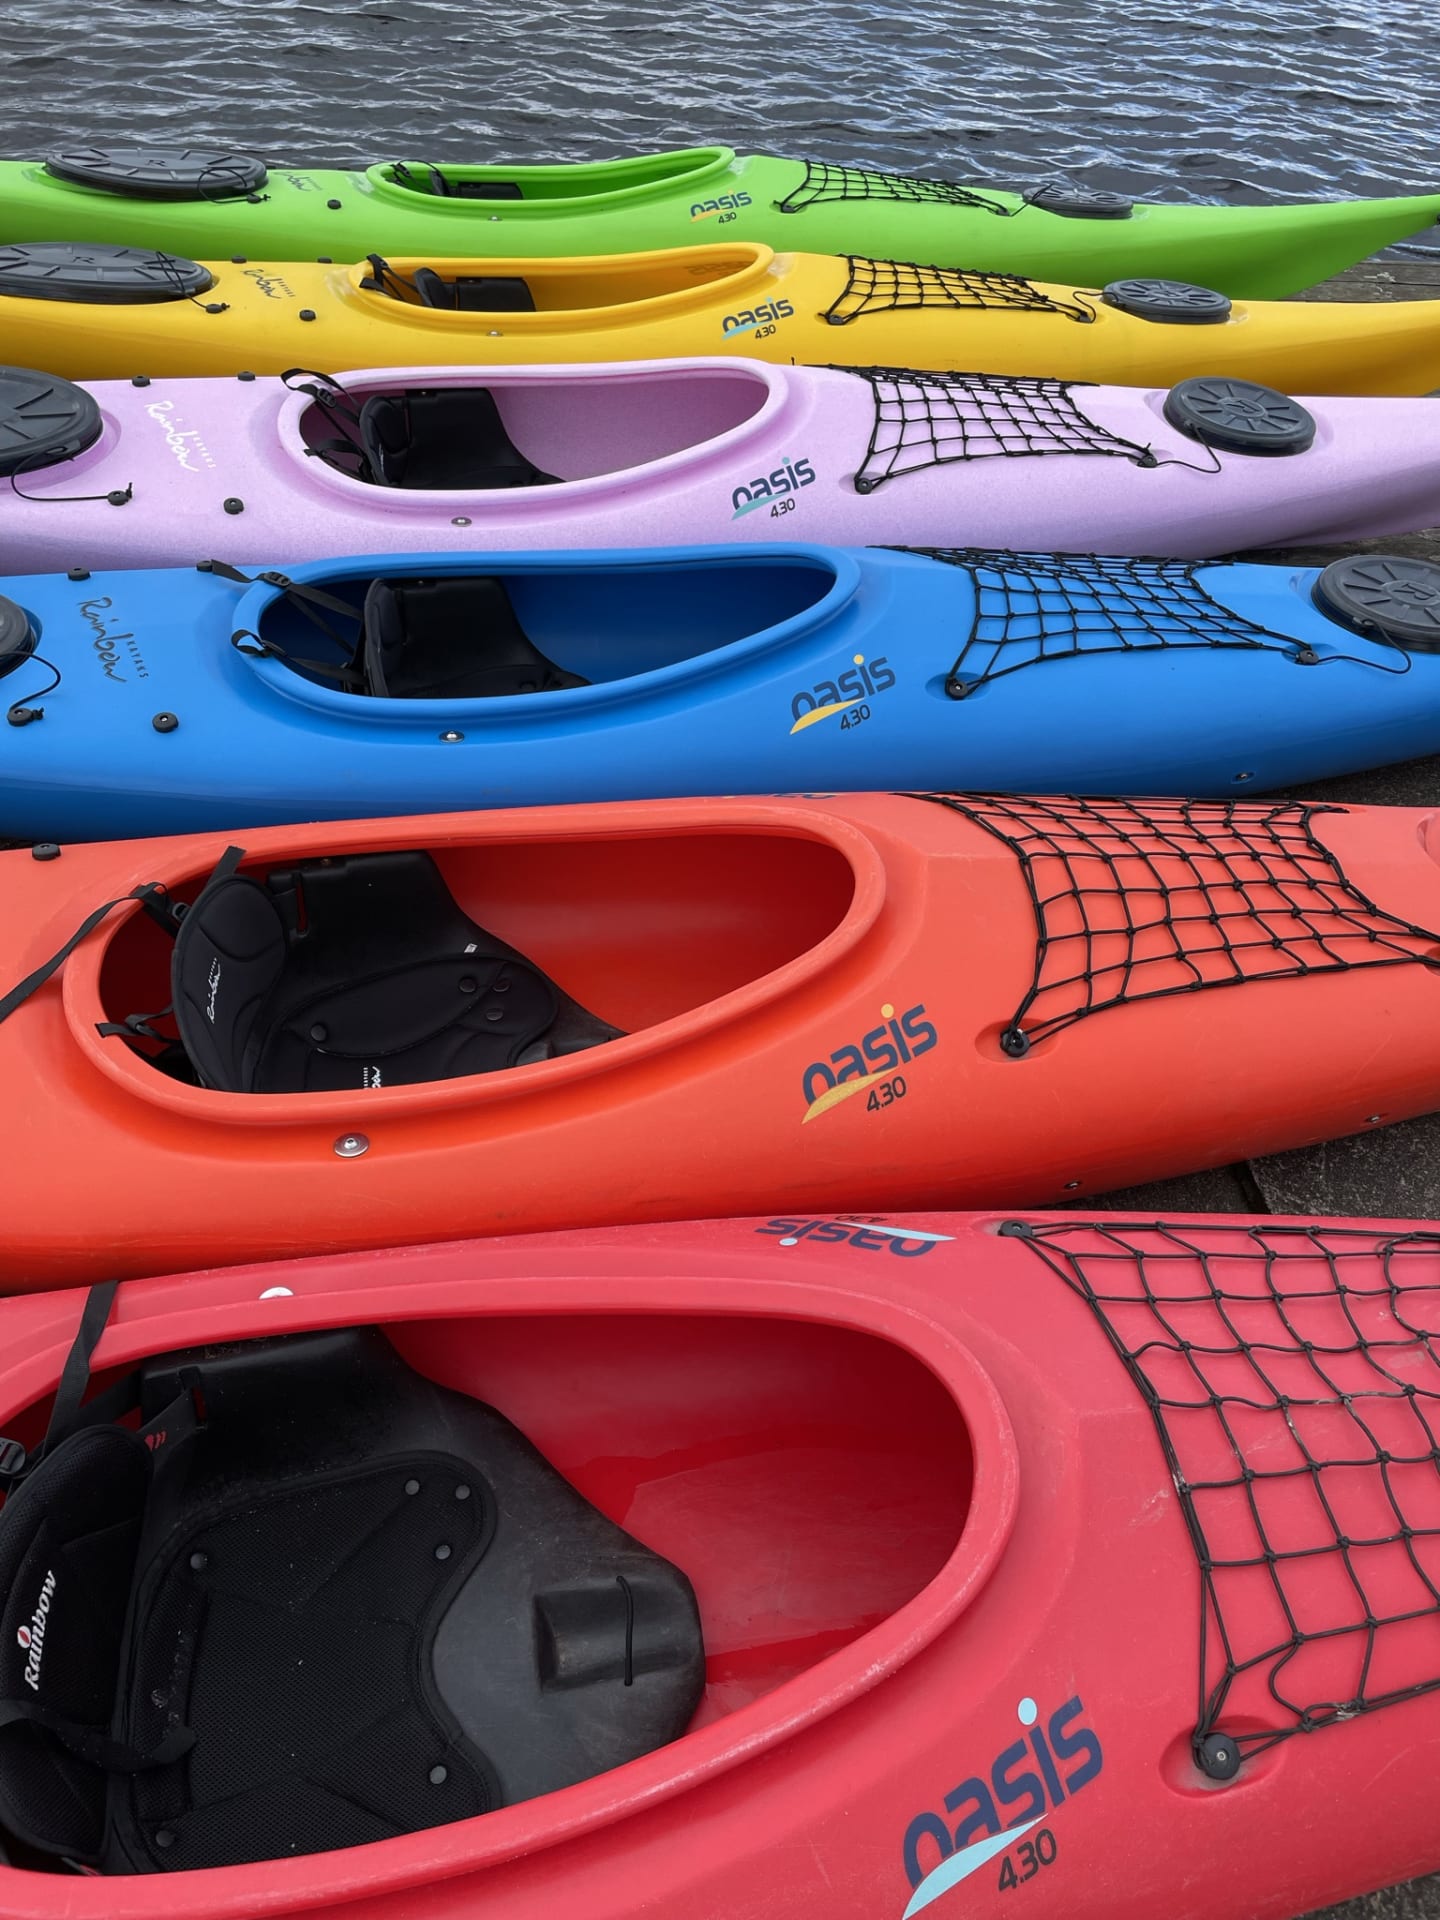 Details of the kayaks